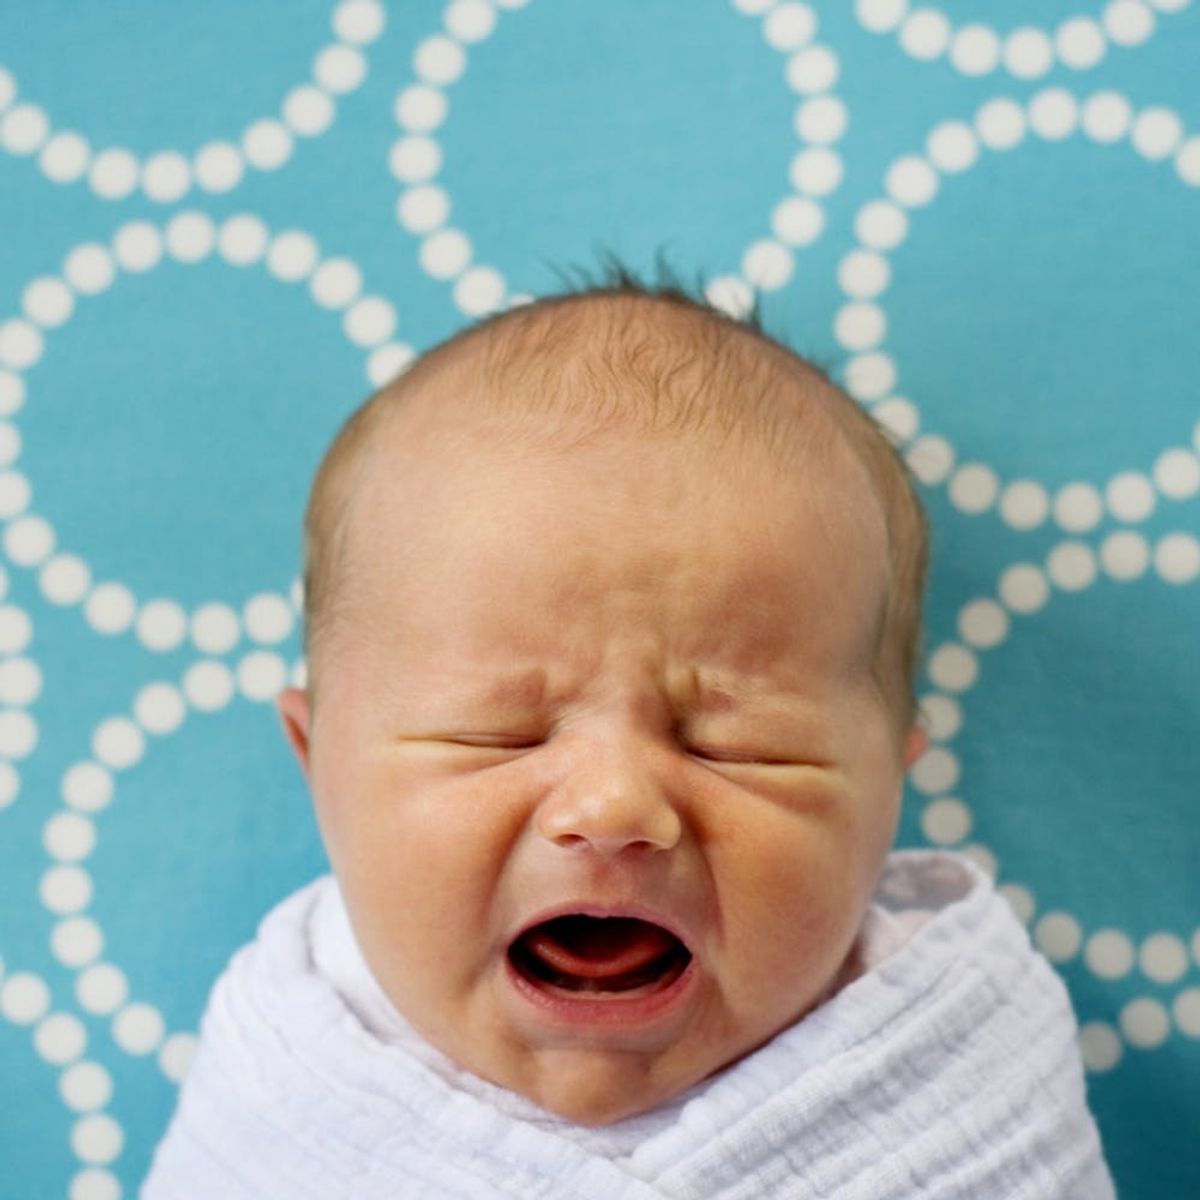 8 Common Reasons Babies Cry and How to Soothe Them